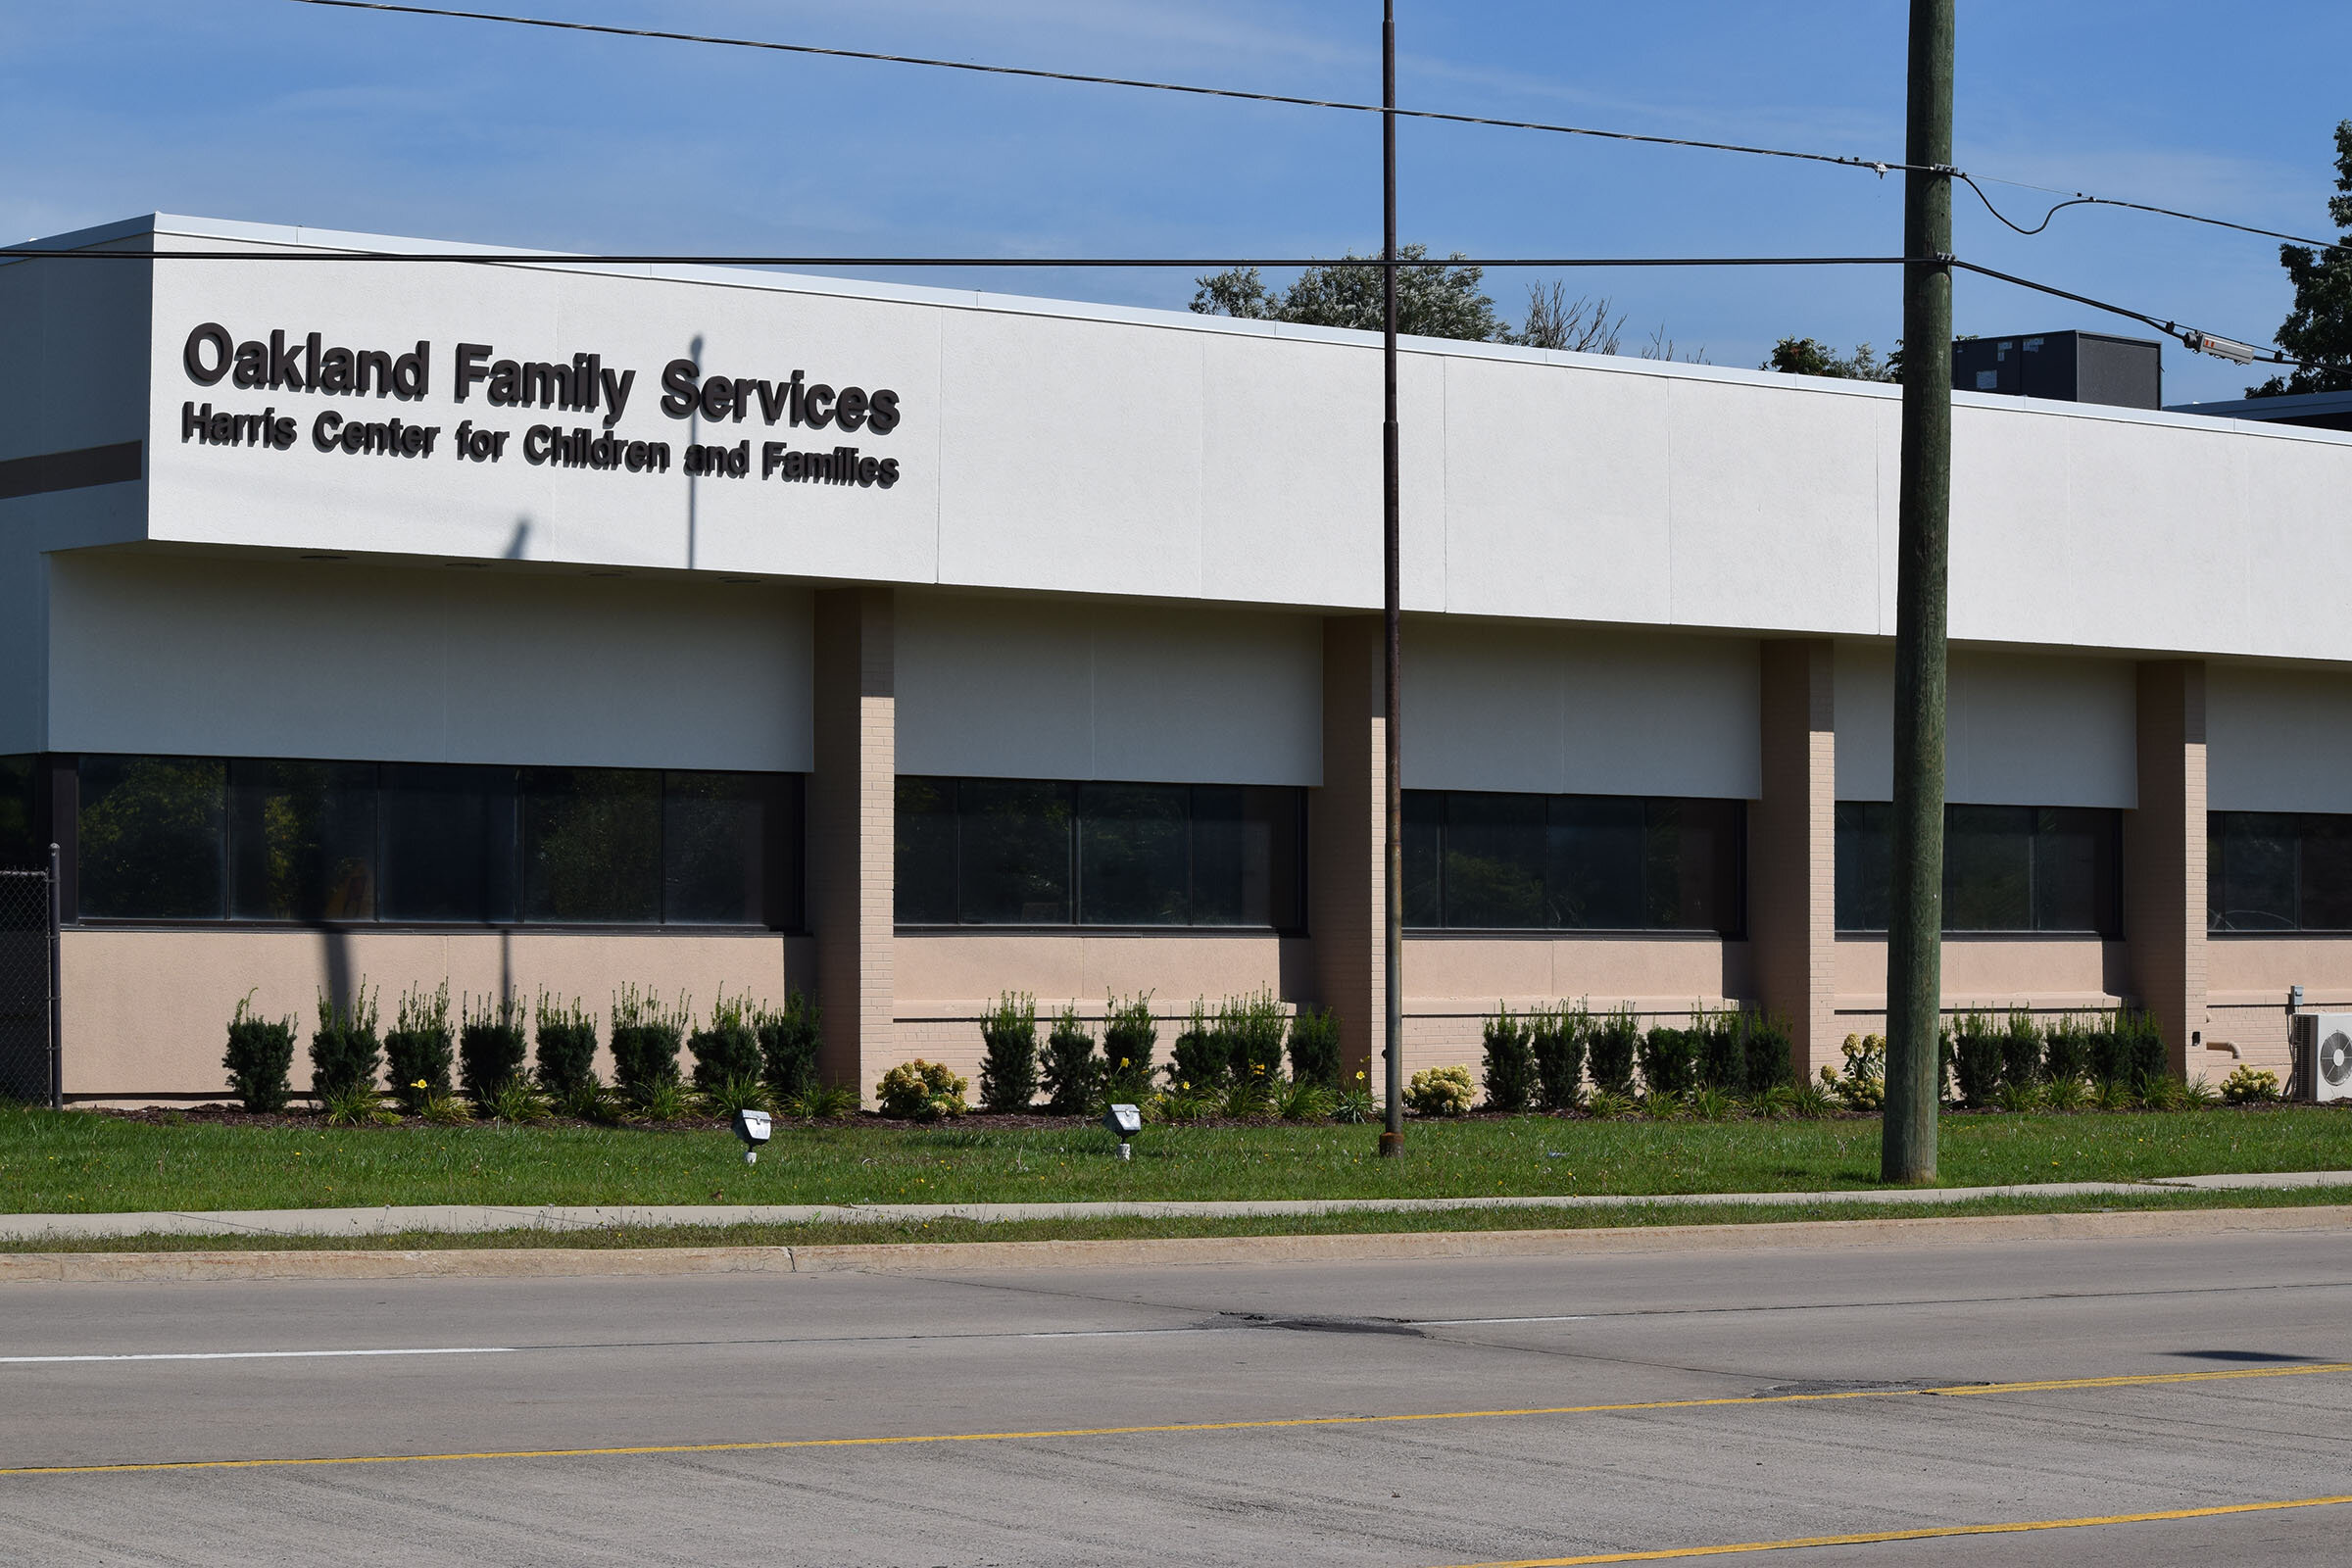  Oakland Family Services’ building in Pontiac was named the “Harris Center for Children and Families” from 2000-2016. 